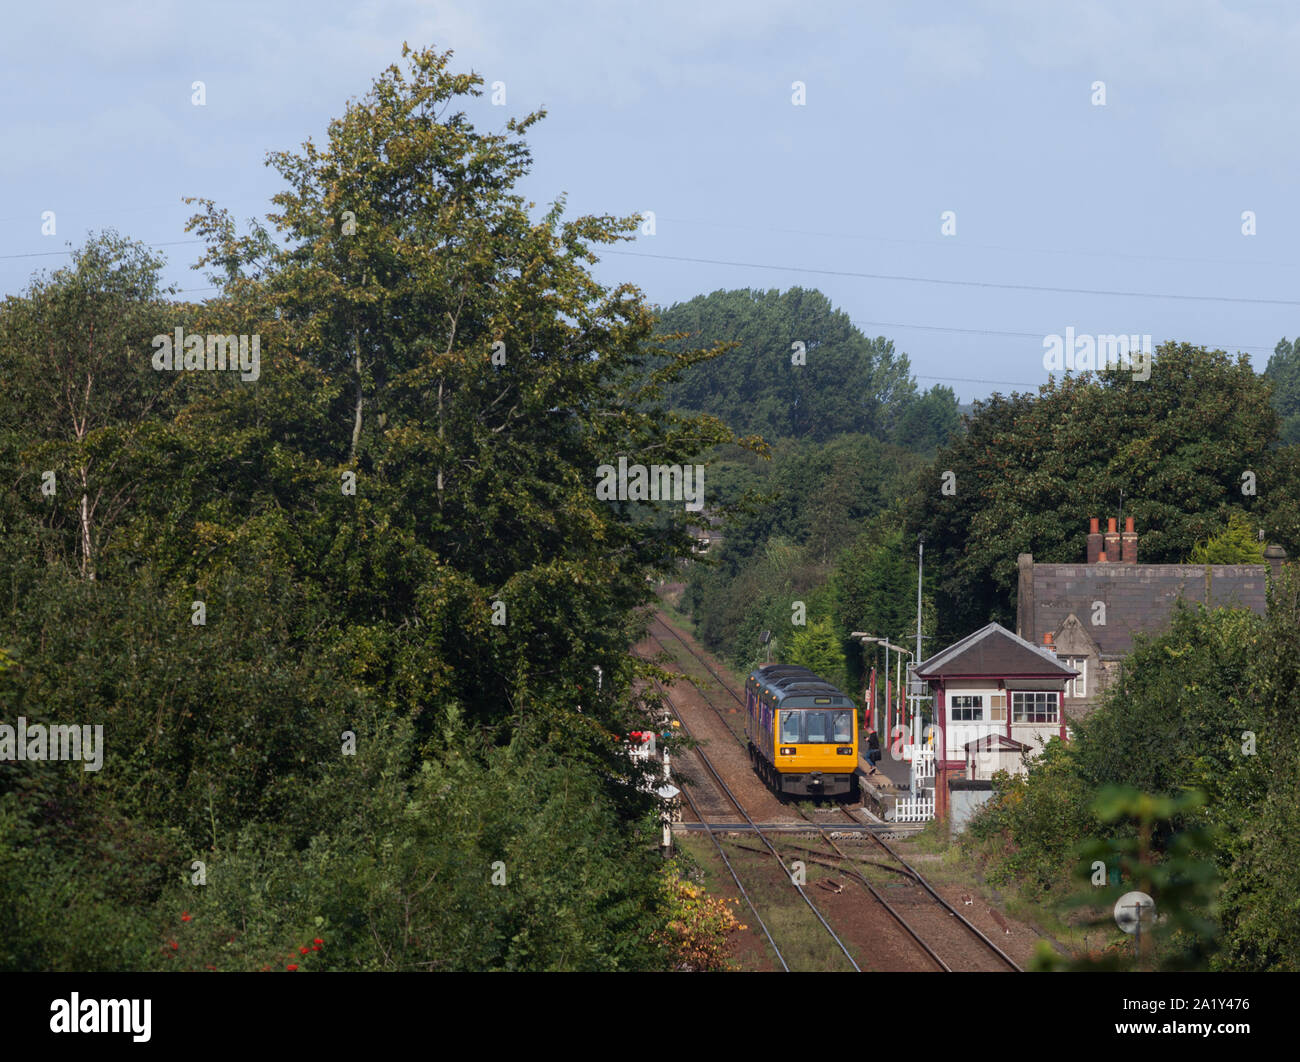 2 Arriva Northern rail class 142 pacer trains calling at  Parbold railway station with the mechanical signalbox visible Stock Photo